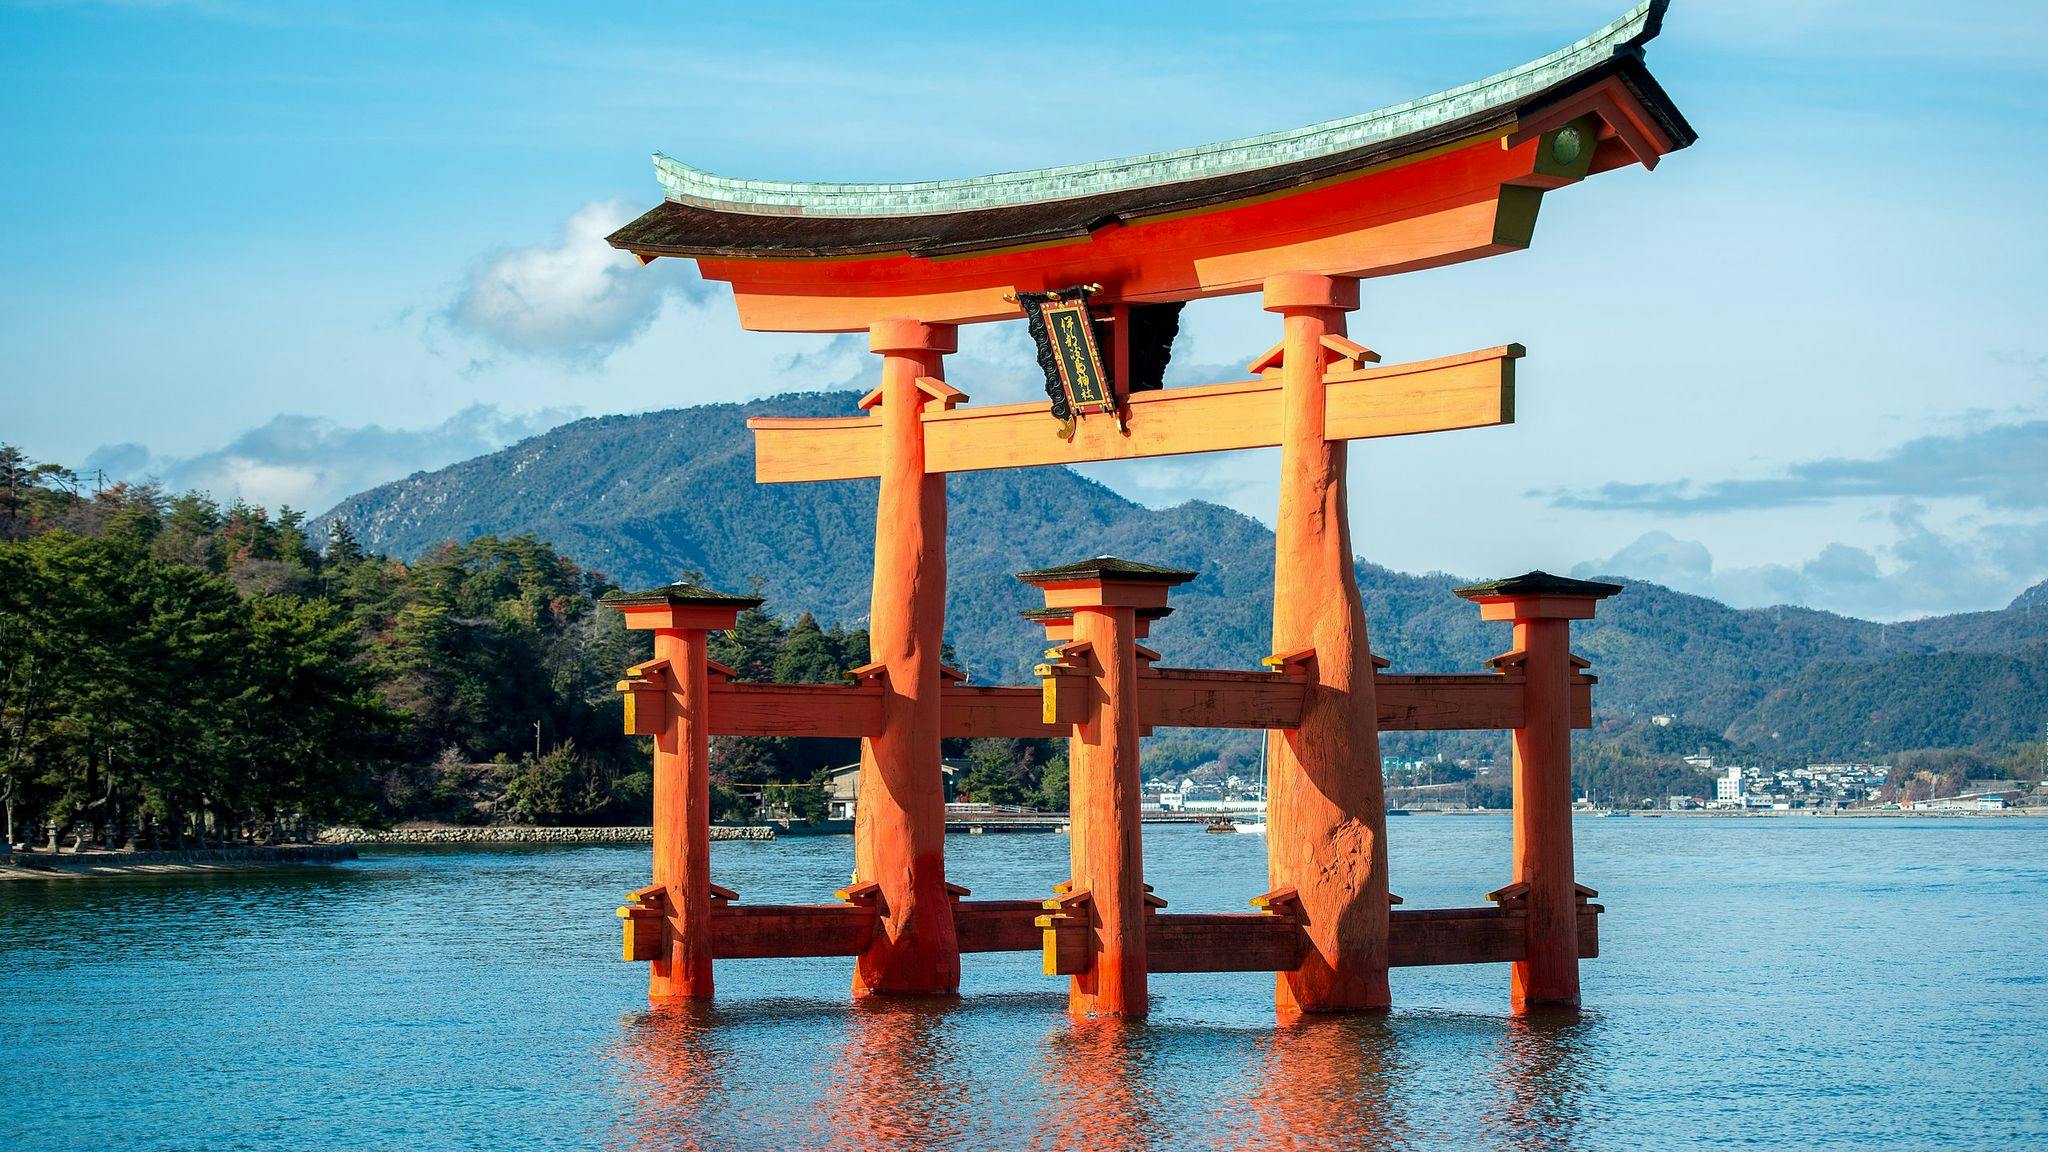 Torii mark the entrance to Shinto shrines and are recognizable symbols of the religion.